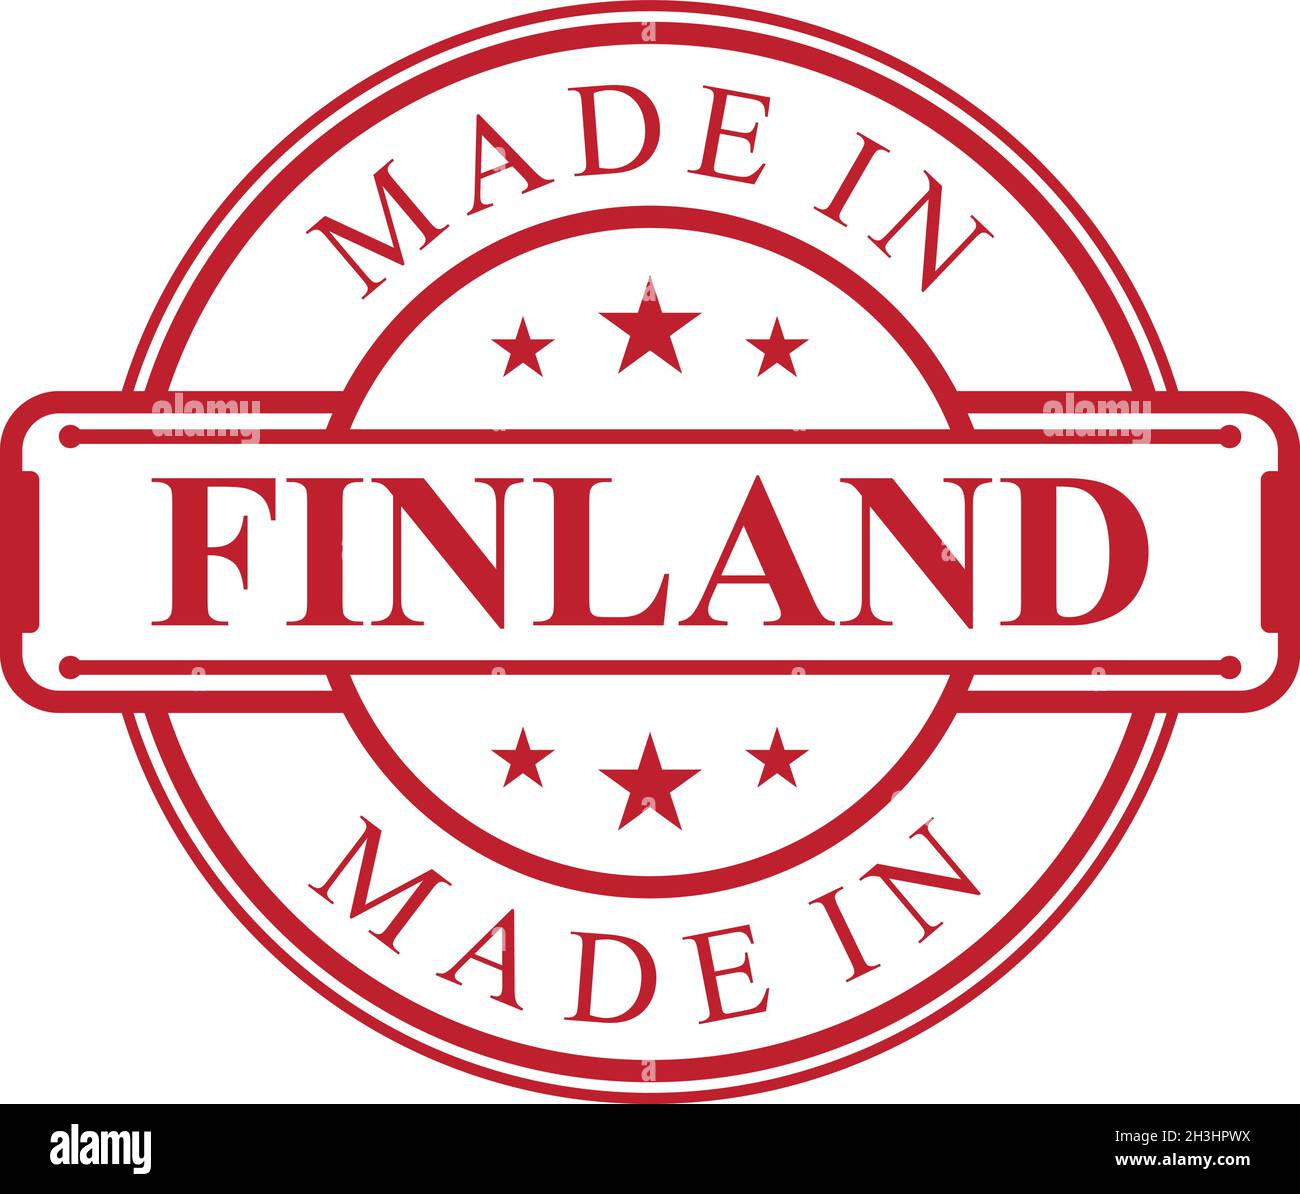 Made in Finland label icon with red color emblem on the white background. Vector quality logo emblem design element. Vector illustration EPS.8 EPS.10 Stock Vector